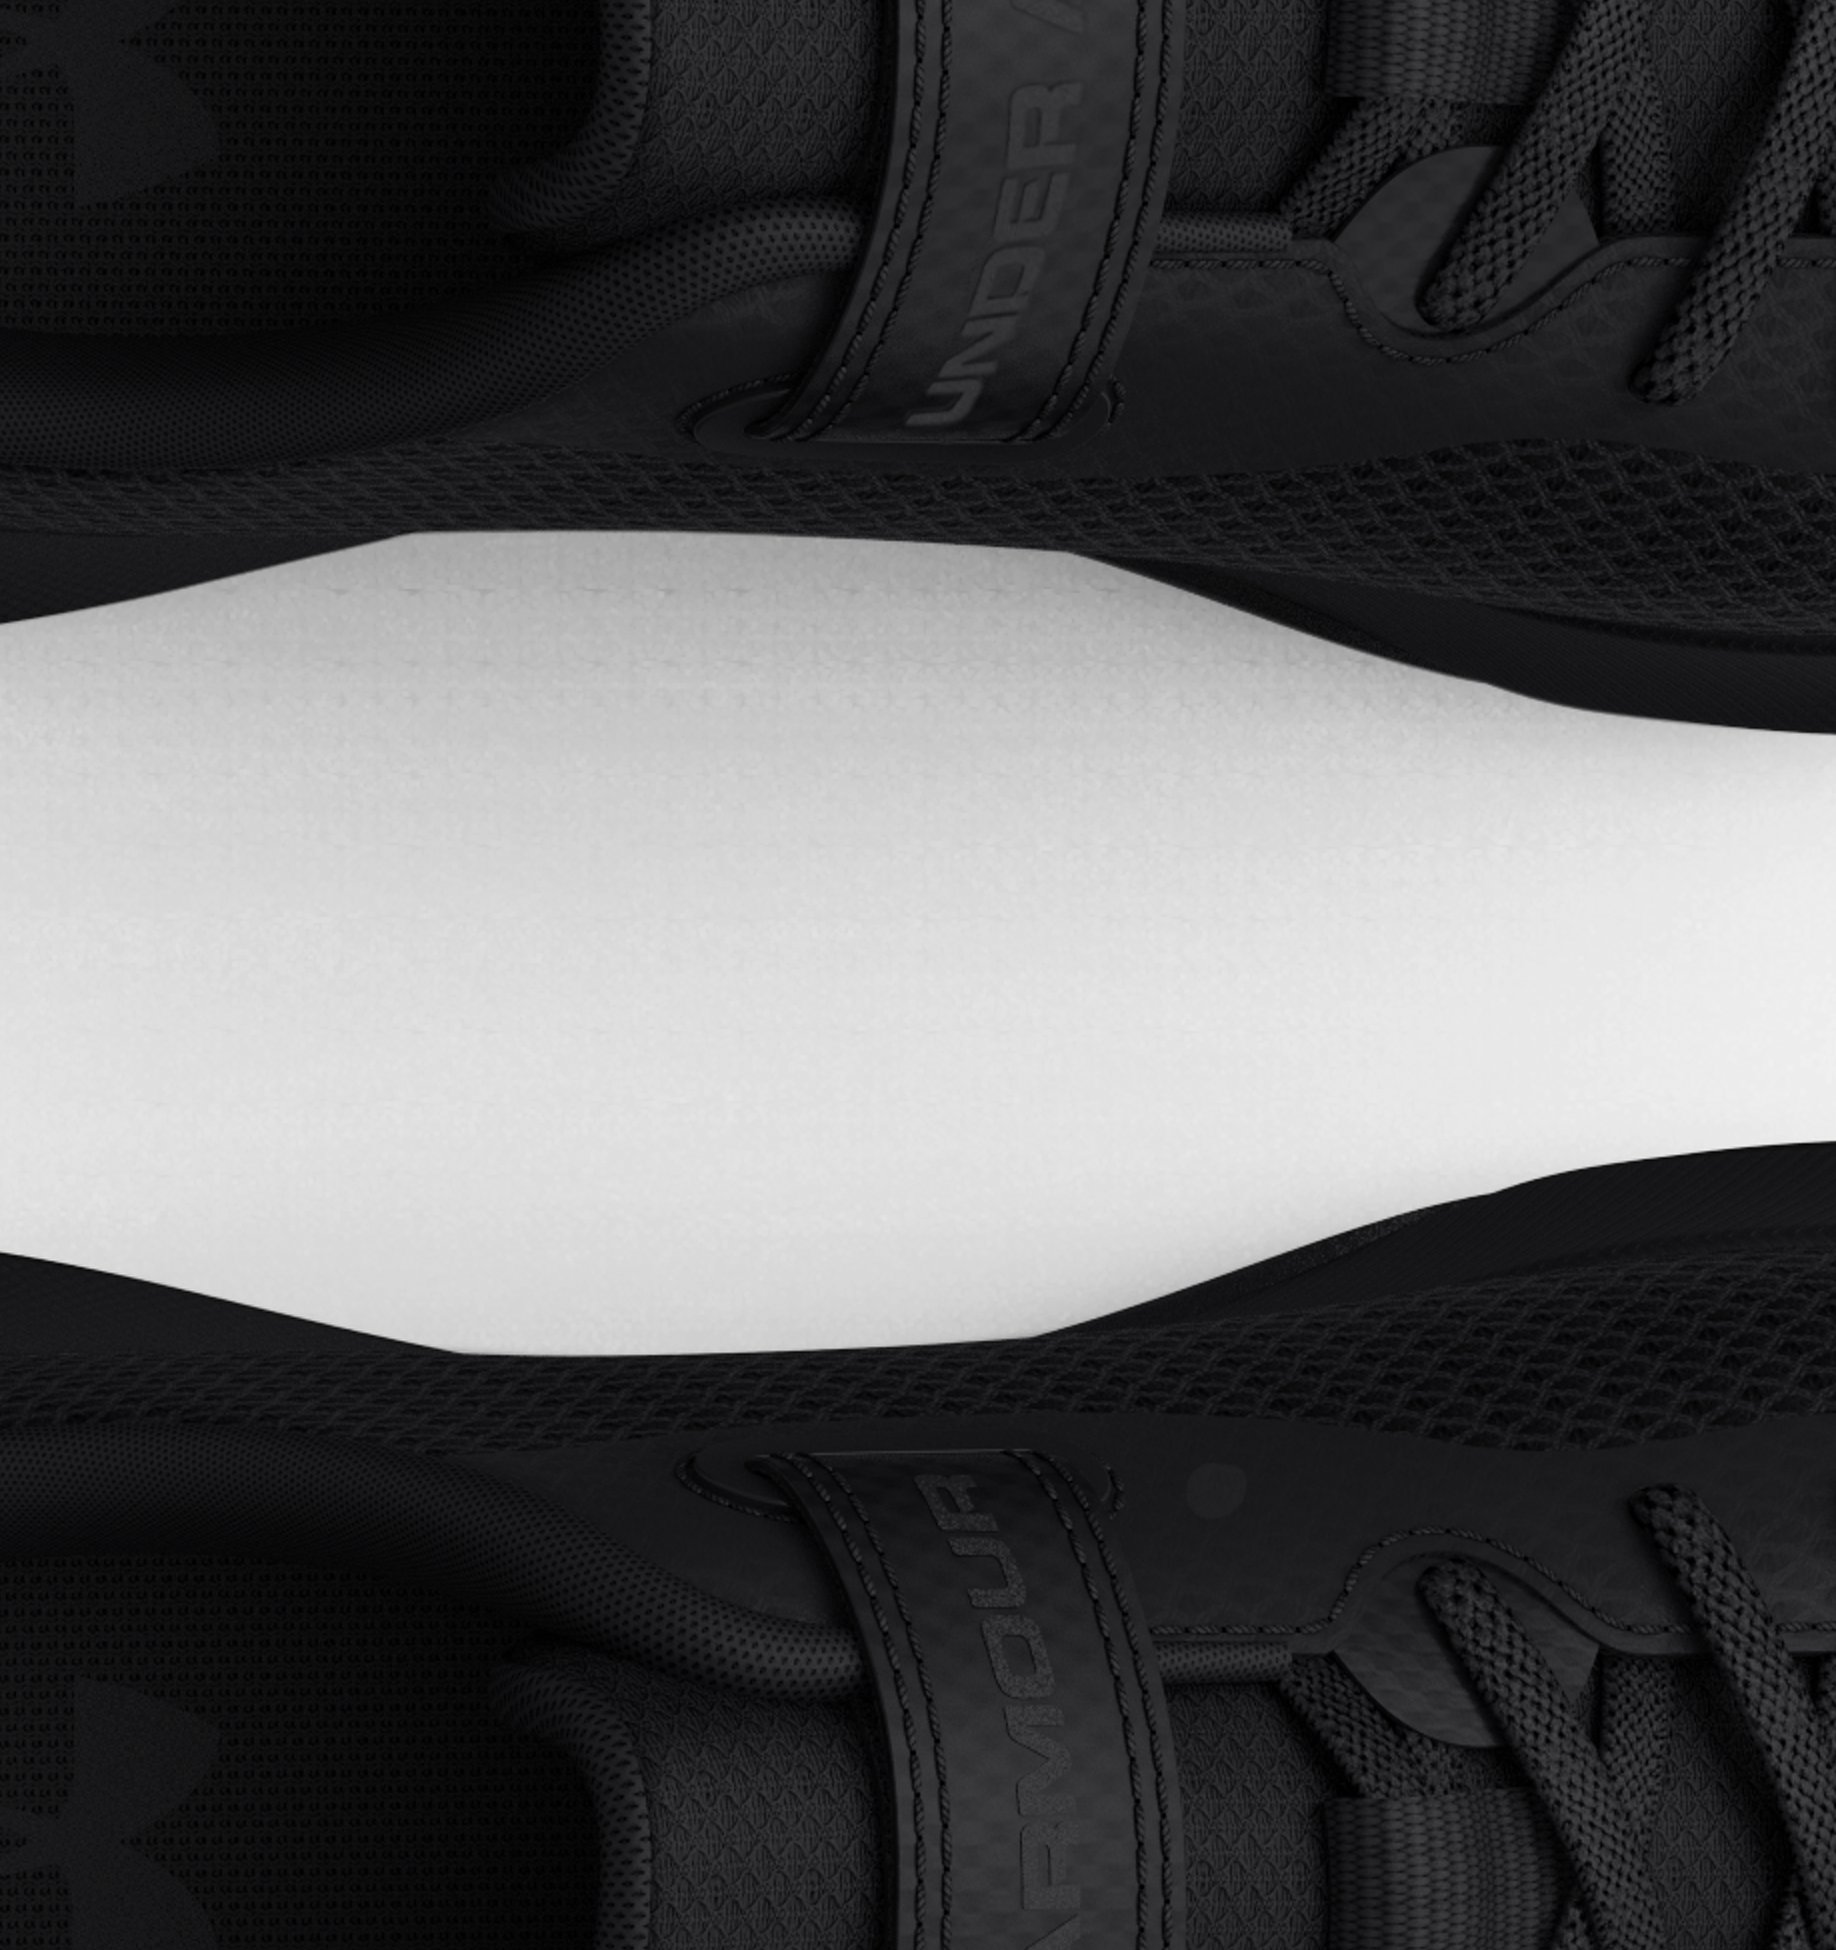 Buy Under Armour Surge 3 pitch grey/white/white from £45.00 (Today) – Best  Deals on